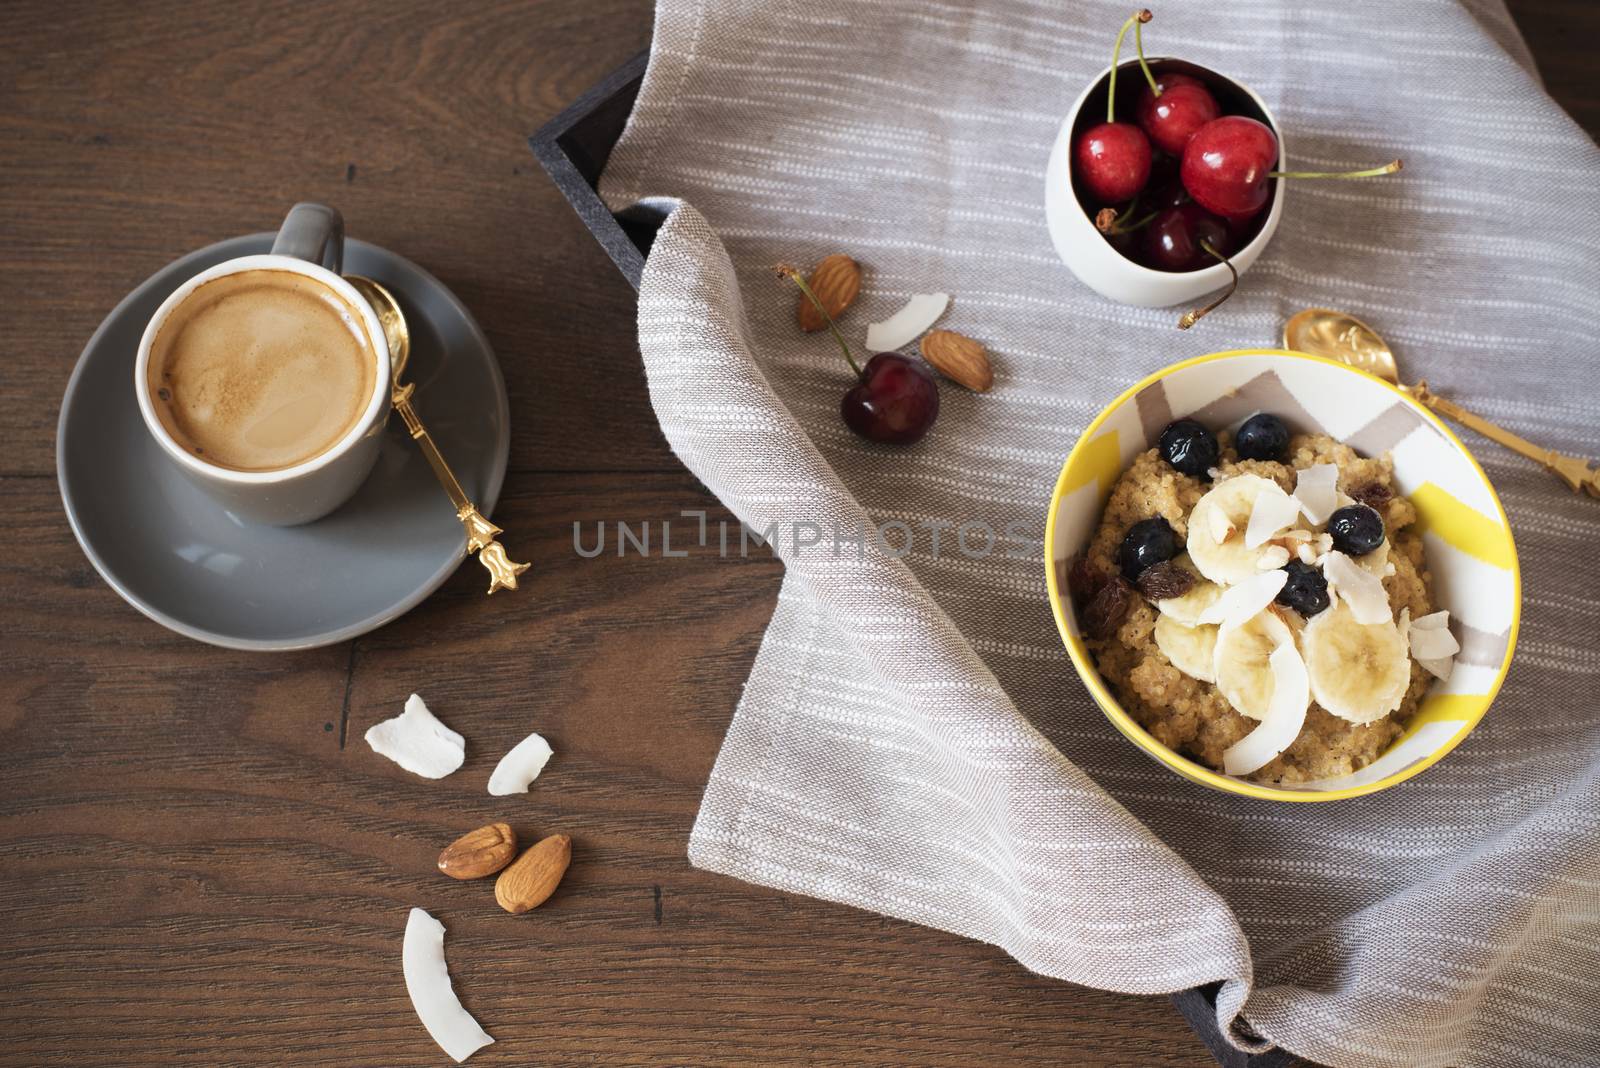 Almond Milk Quinoa With Fresh Fruits, Cherries And Coffee in a Tray. Healthy Breakfast, Lifestyle Concept. Top View. Dark Wooden Background. Fitness Mood Diet. Summer Light Snack by sevda_stancheva